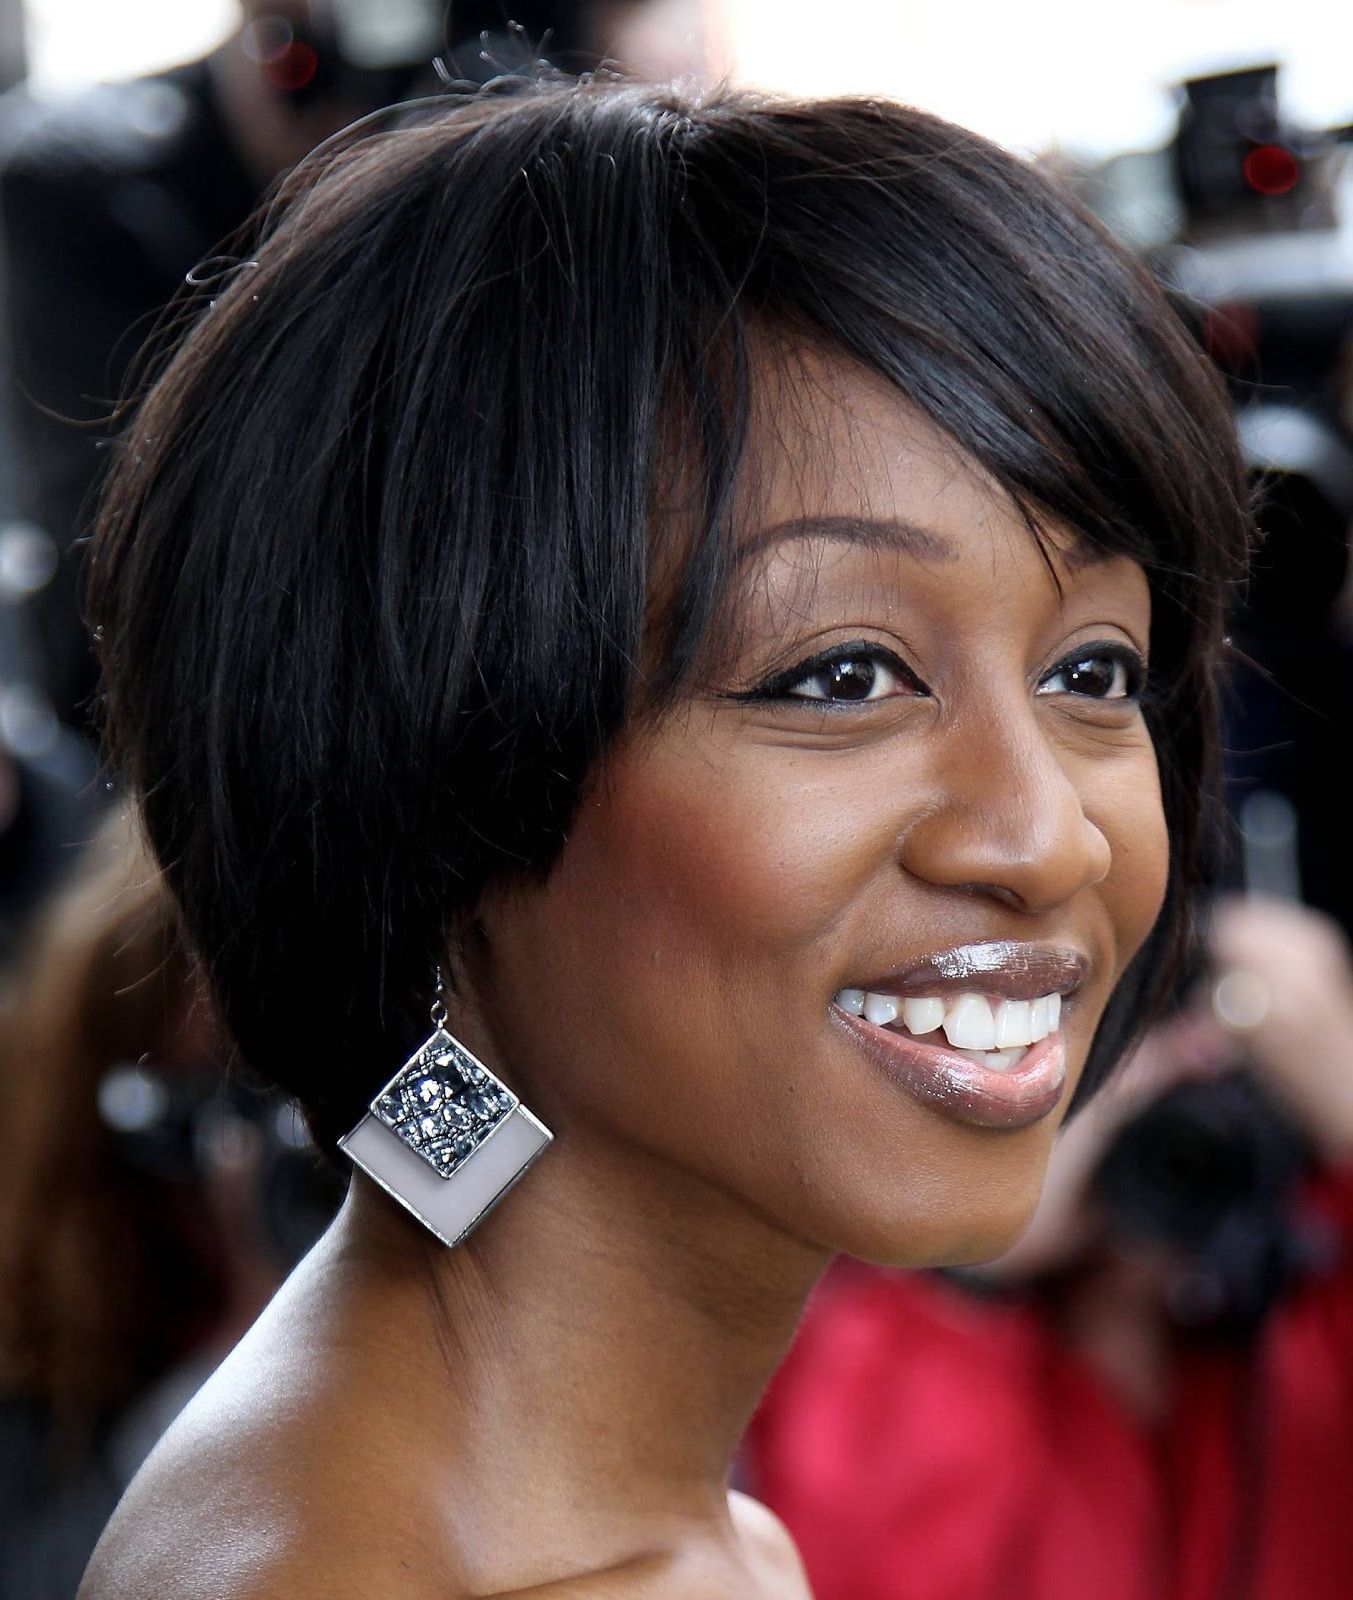 Fashionable: Short Hairstyles For Black Women With Regard To Short Haircuts For Round Faces Black Women (View 15 of 25)